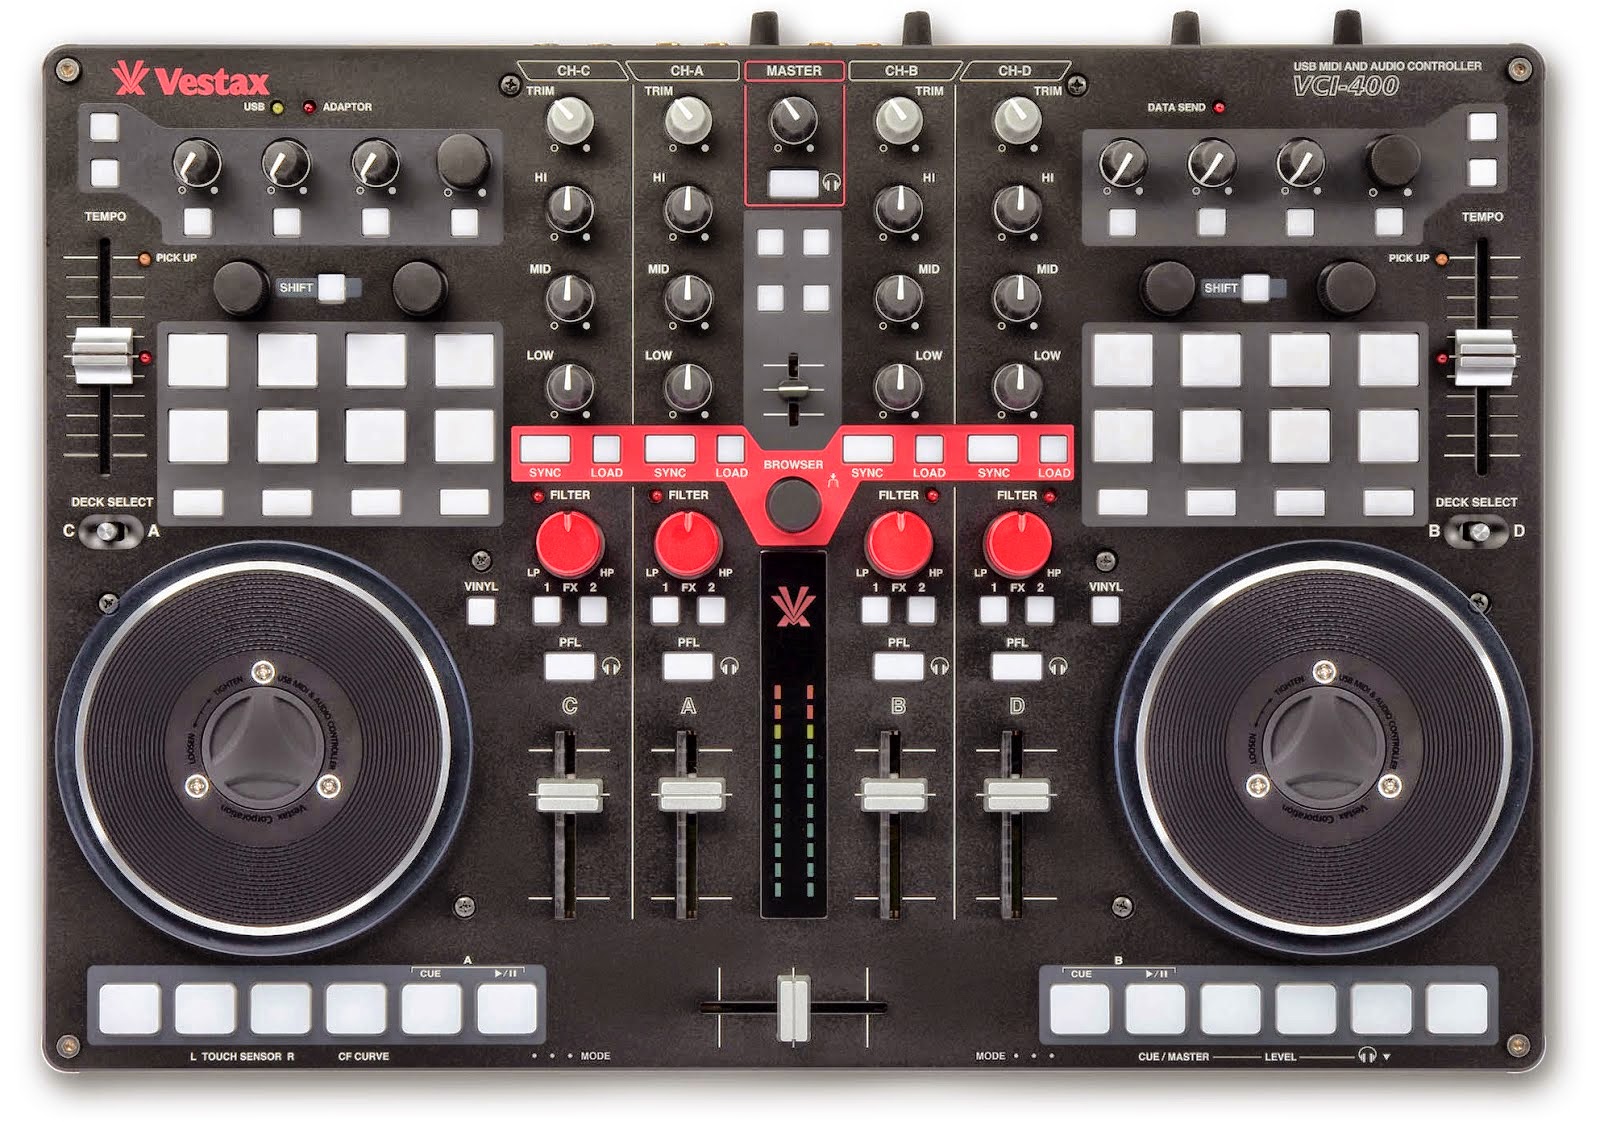 Vestax vci 380 drivers for mac